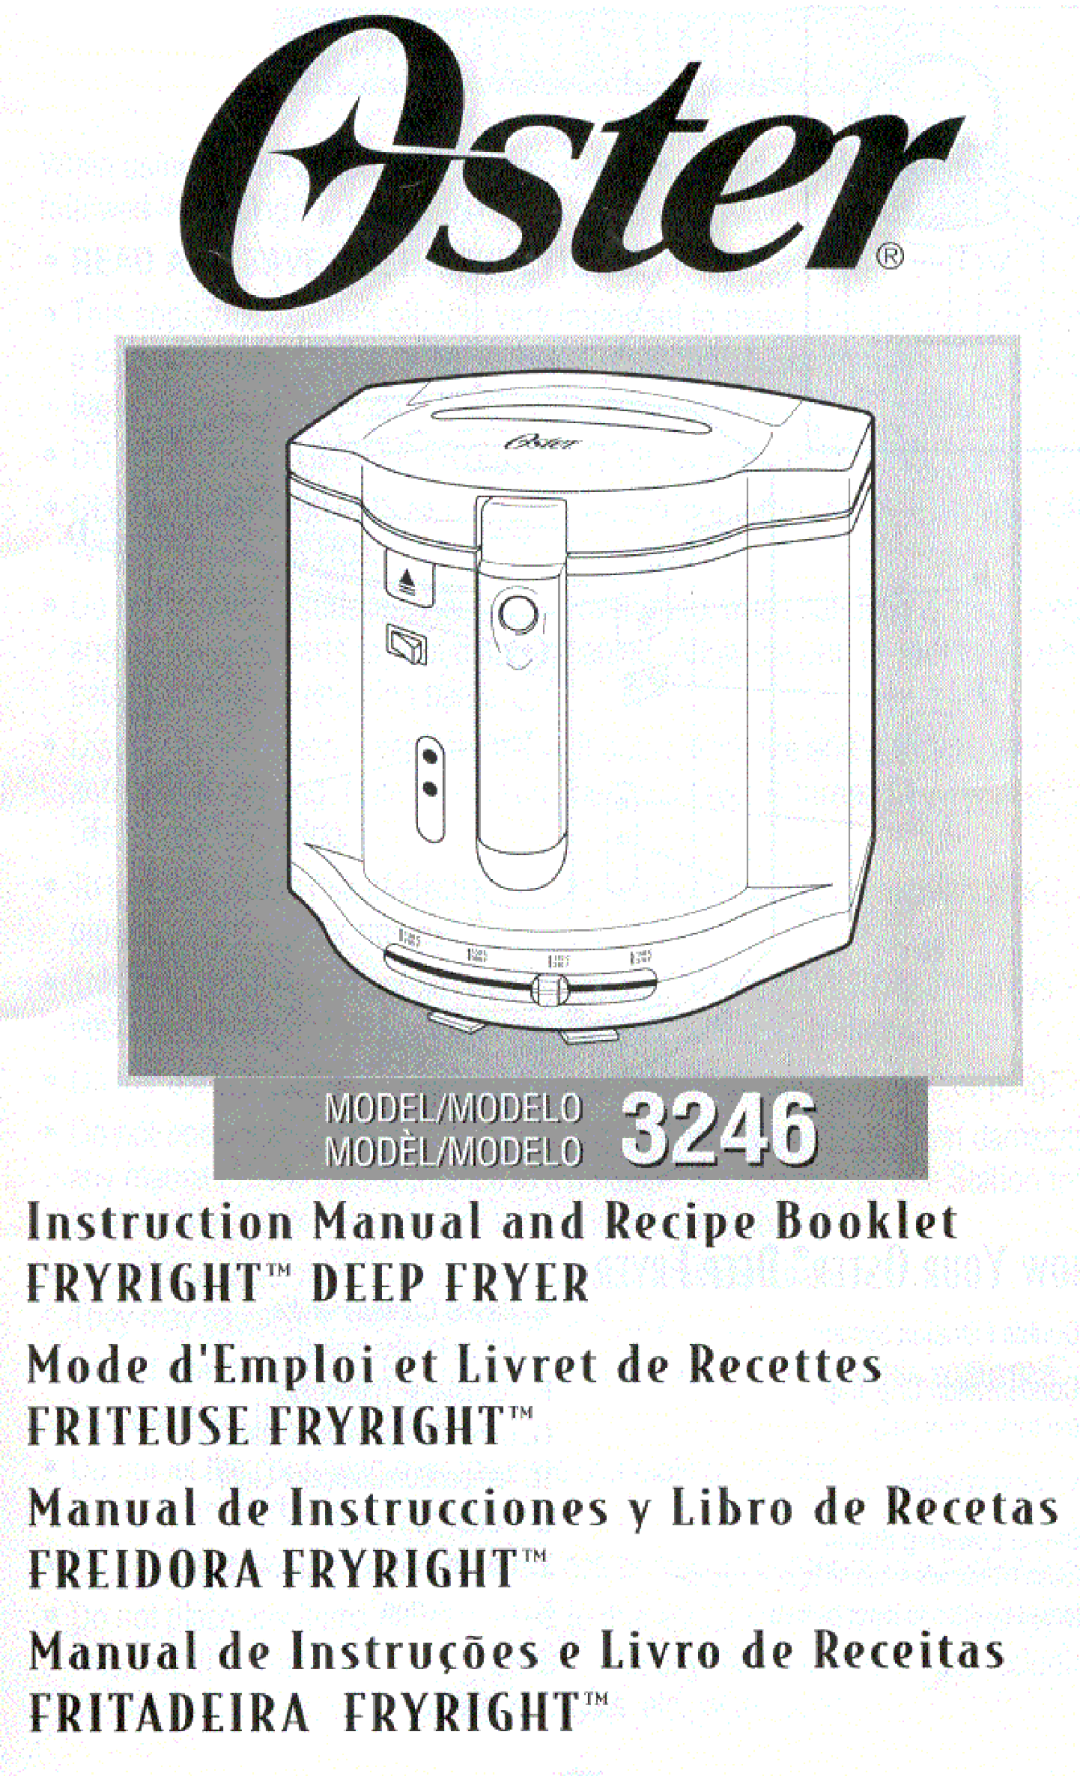 Oster 3246 manual 